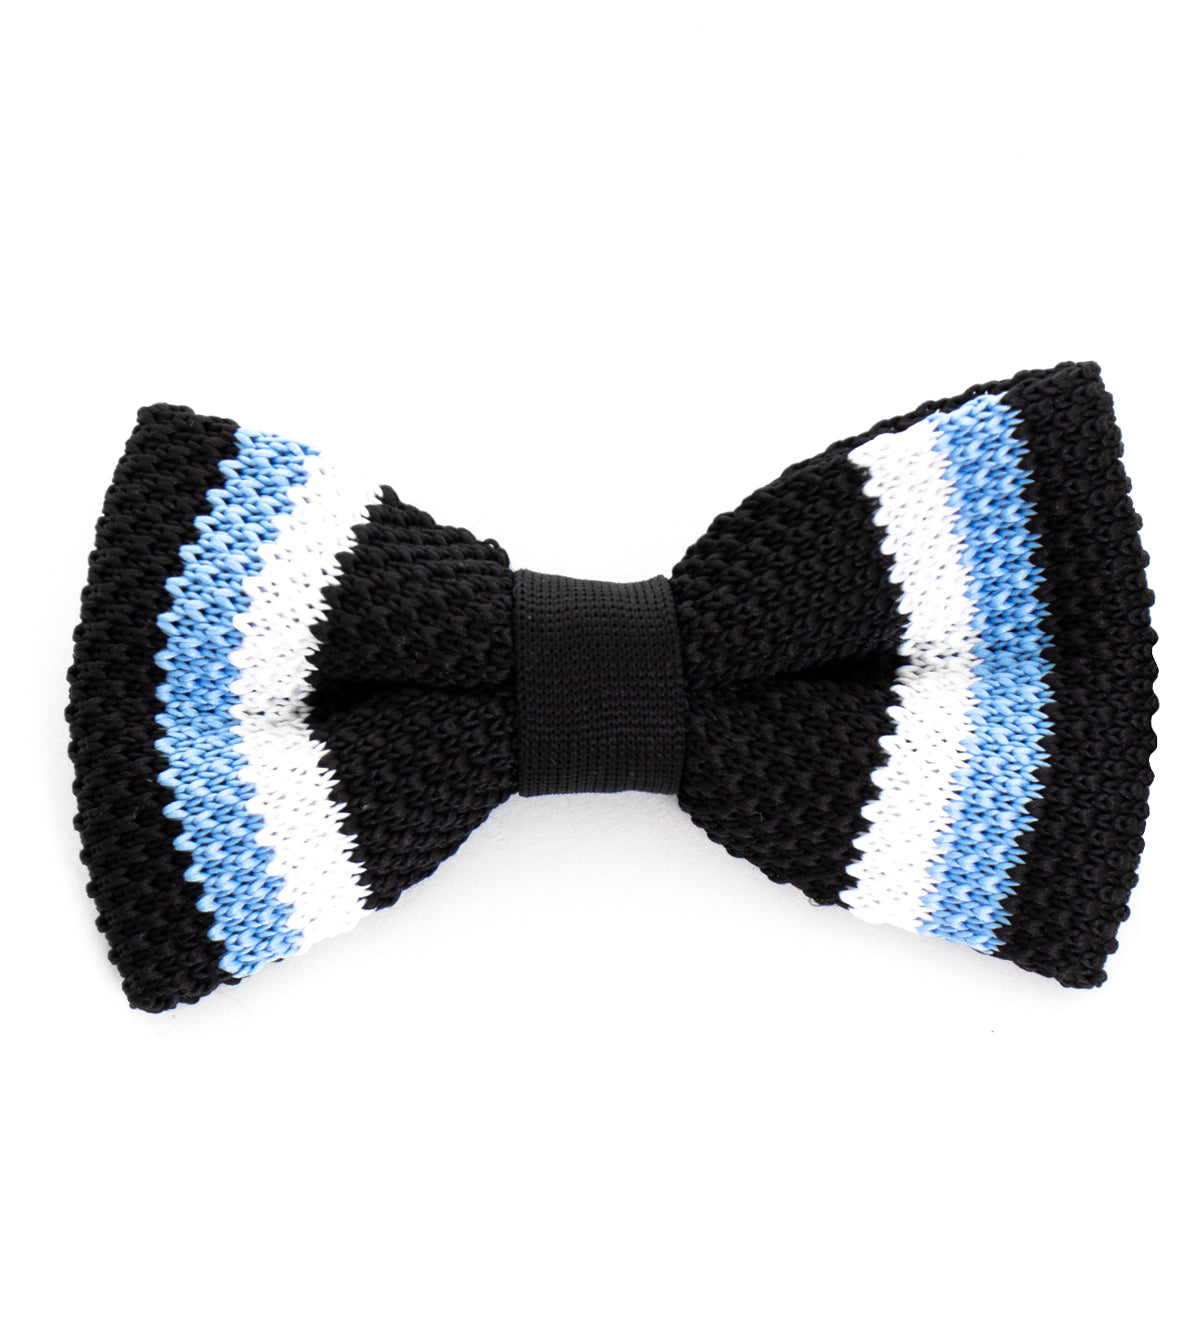 Bow Tie Butterfly Bow Man Unisex Elegant Ceremony Accessory Black Striped Knitted GIOSAL-CP1092A 